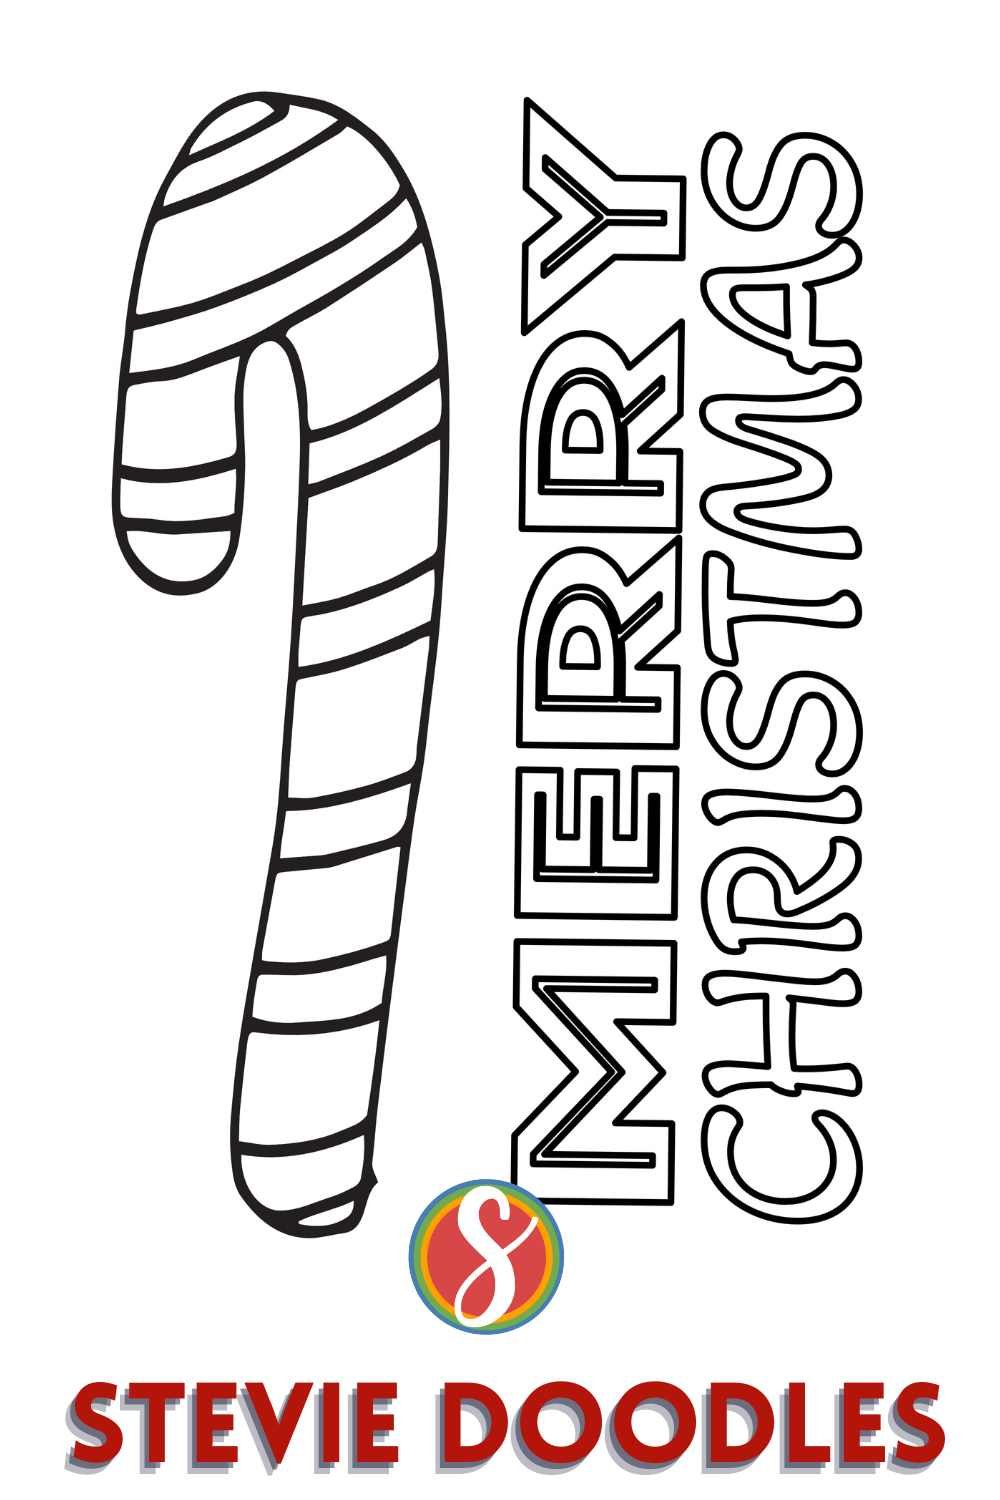 Free candy cane coloring pages â stevie doodles